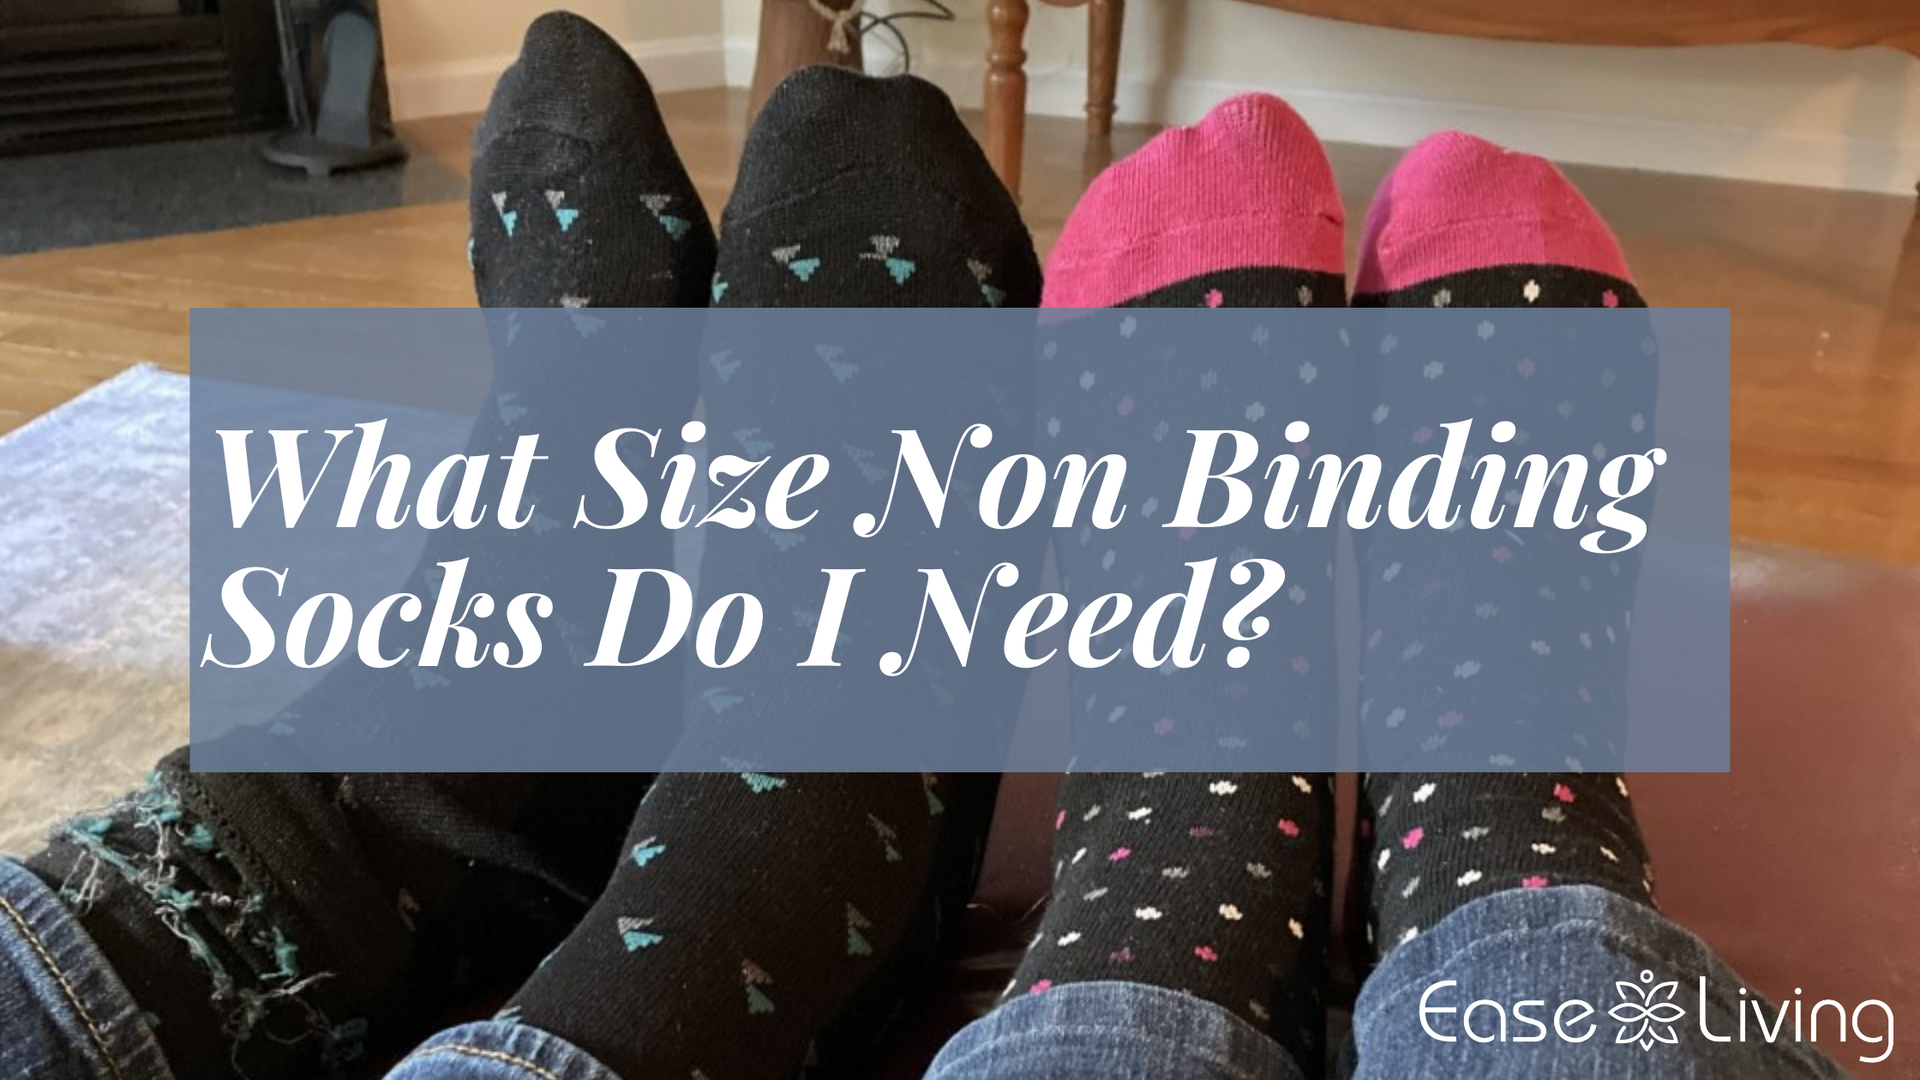 Answering Questions About Sizing for Ease Living's Non Binding Socks